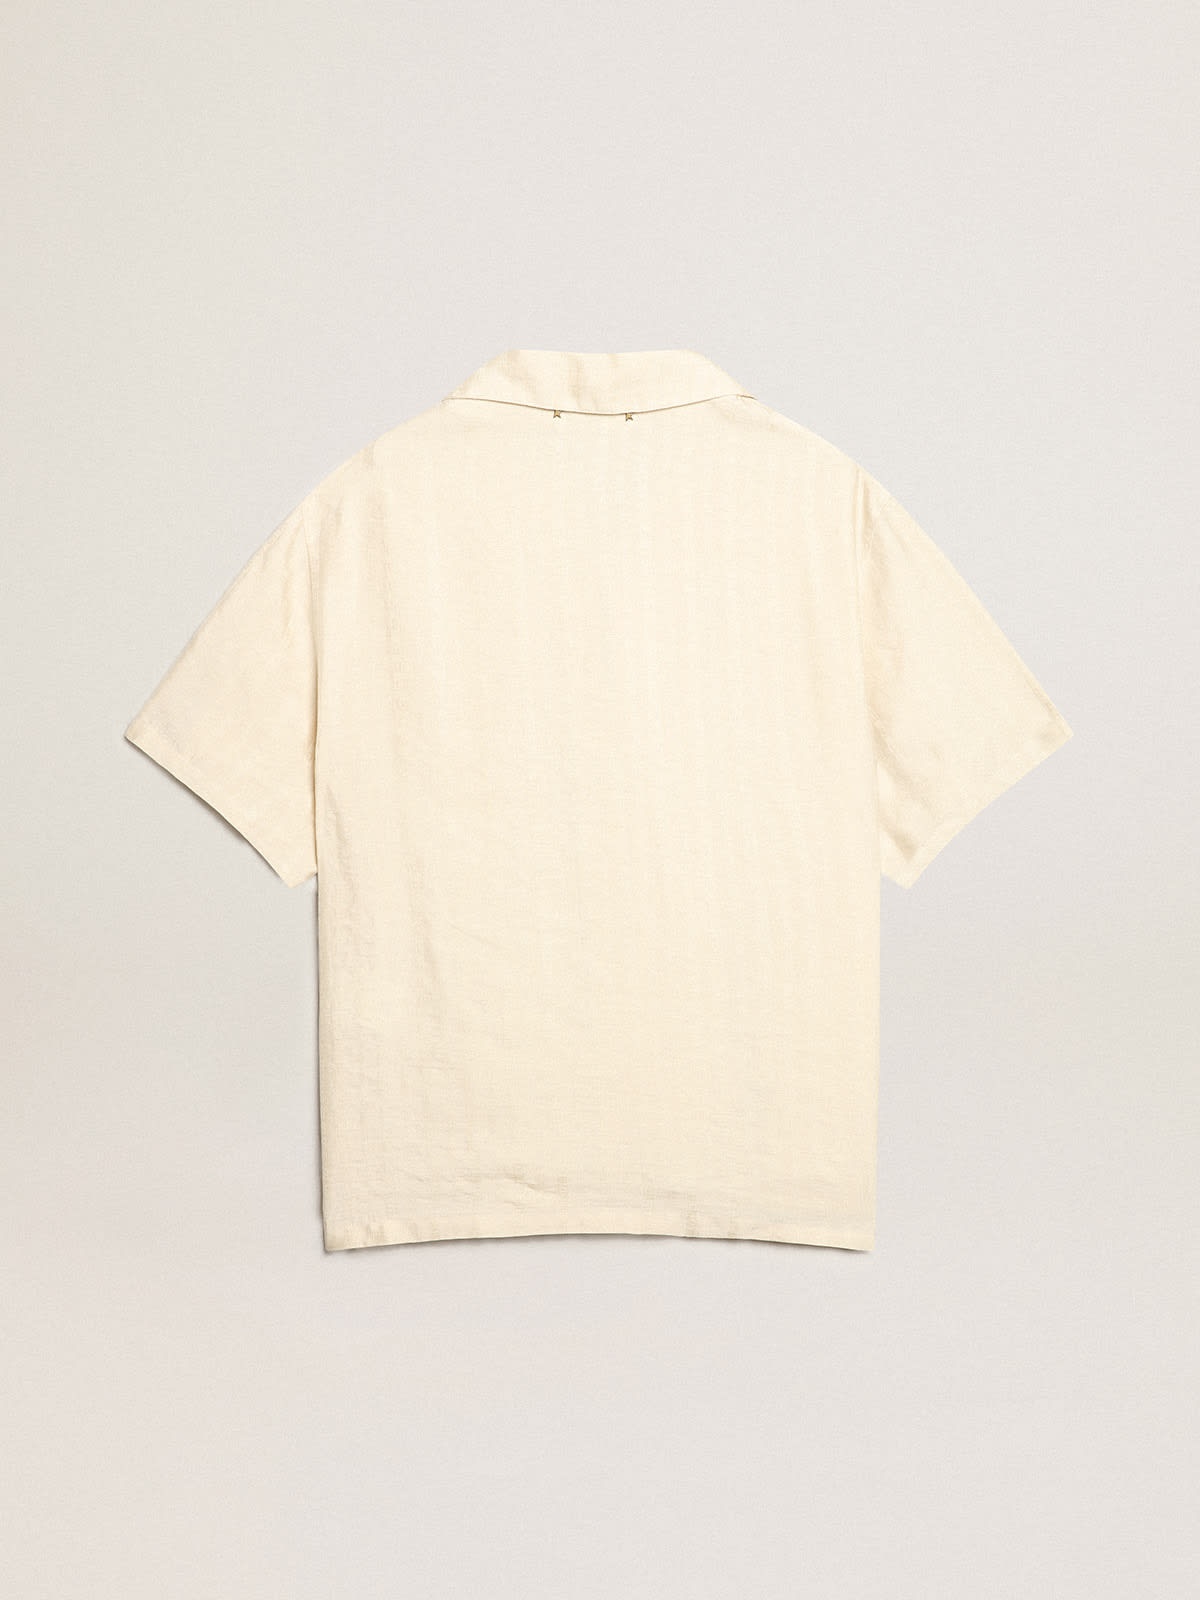 Short-sleeved shirt in parchment-colored linen - 6